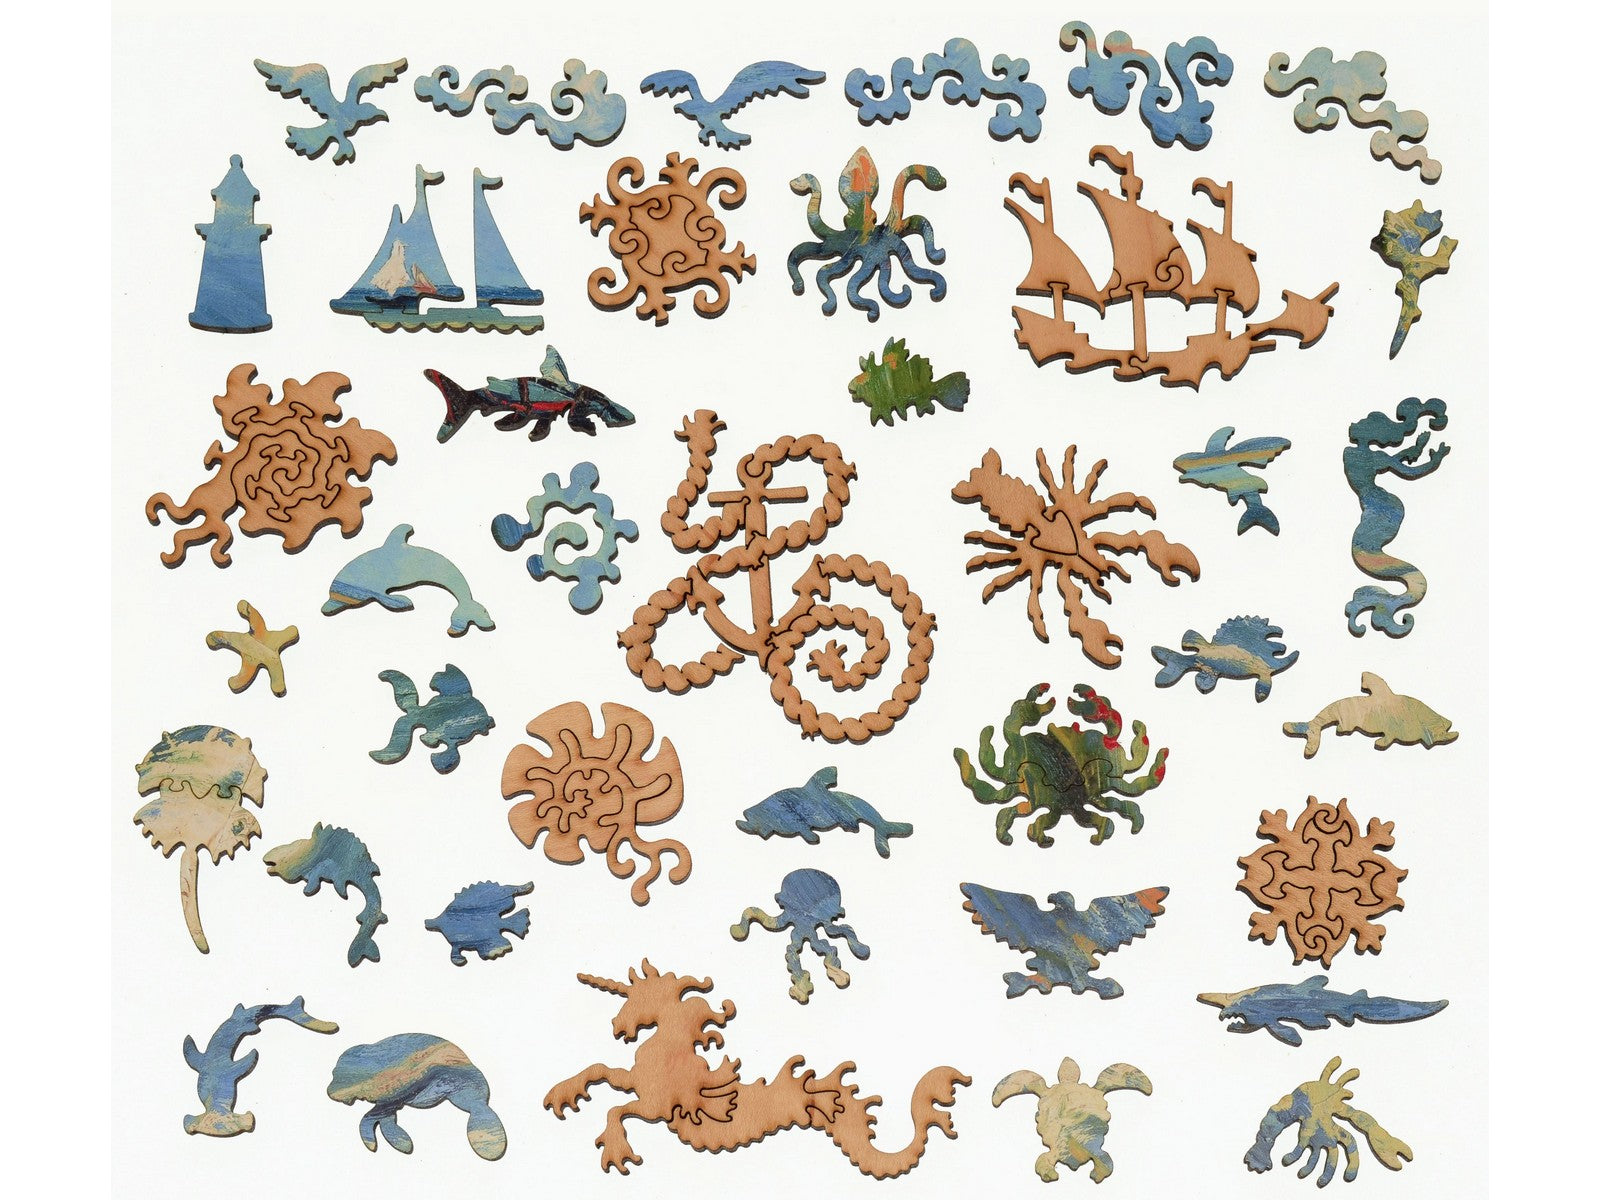 The whimsies that can be found in the puzzle, Seascape near Les Saintes Maries de la Mer.